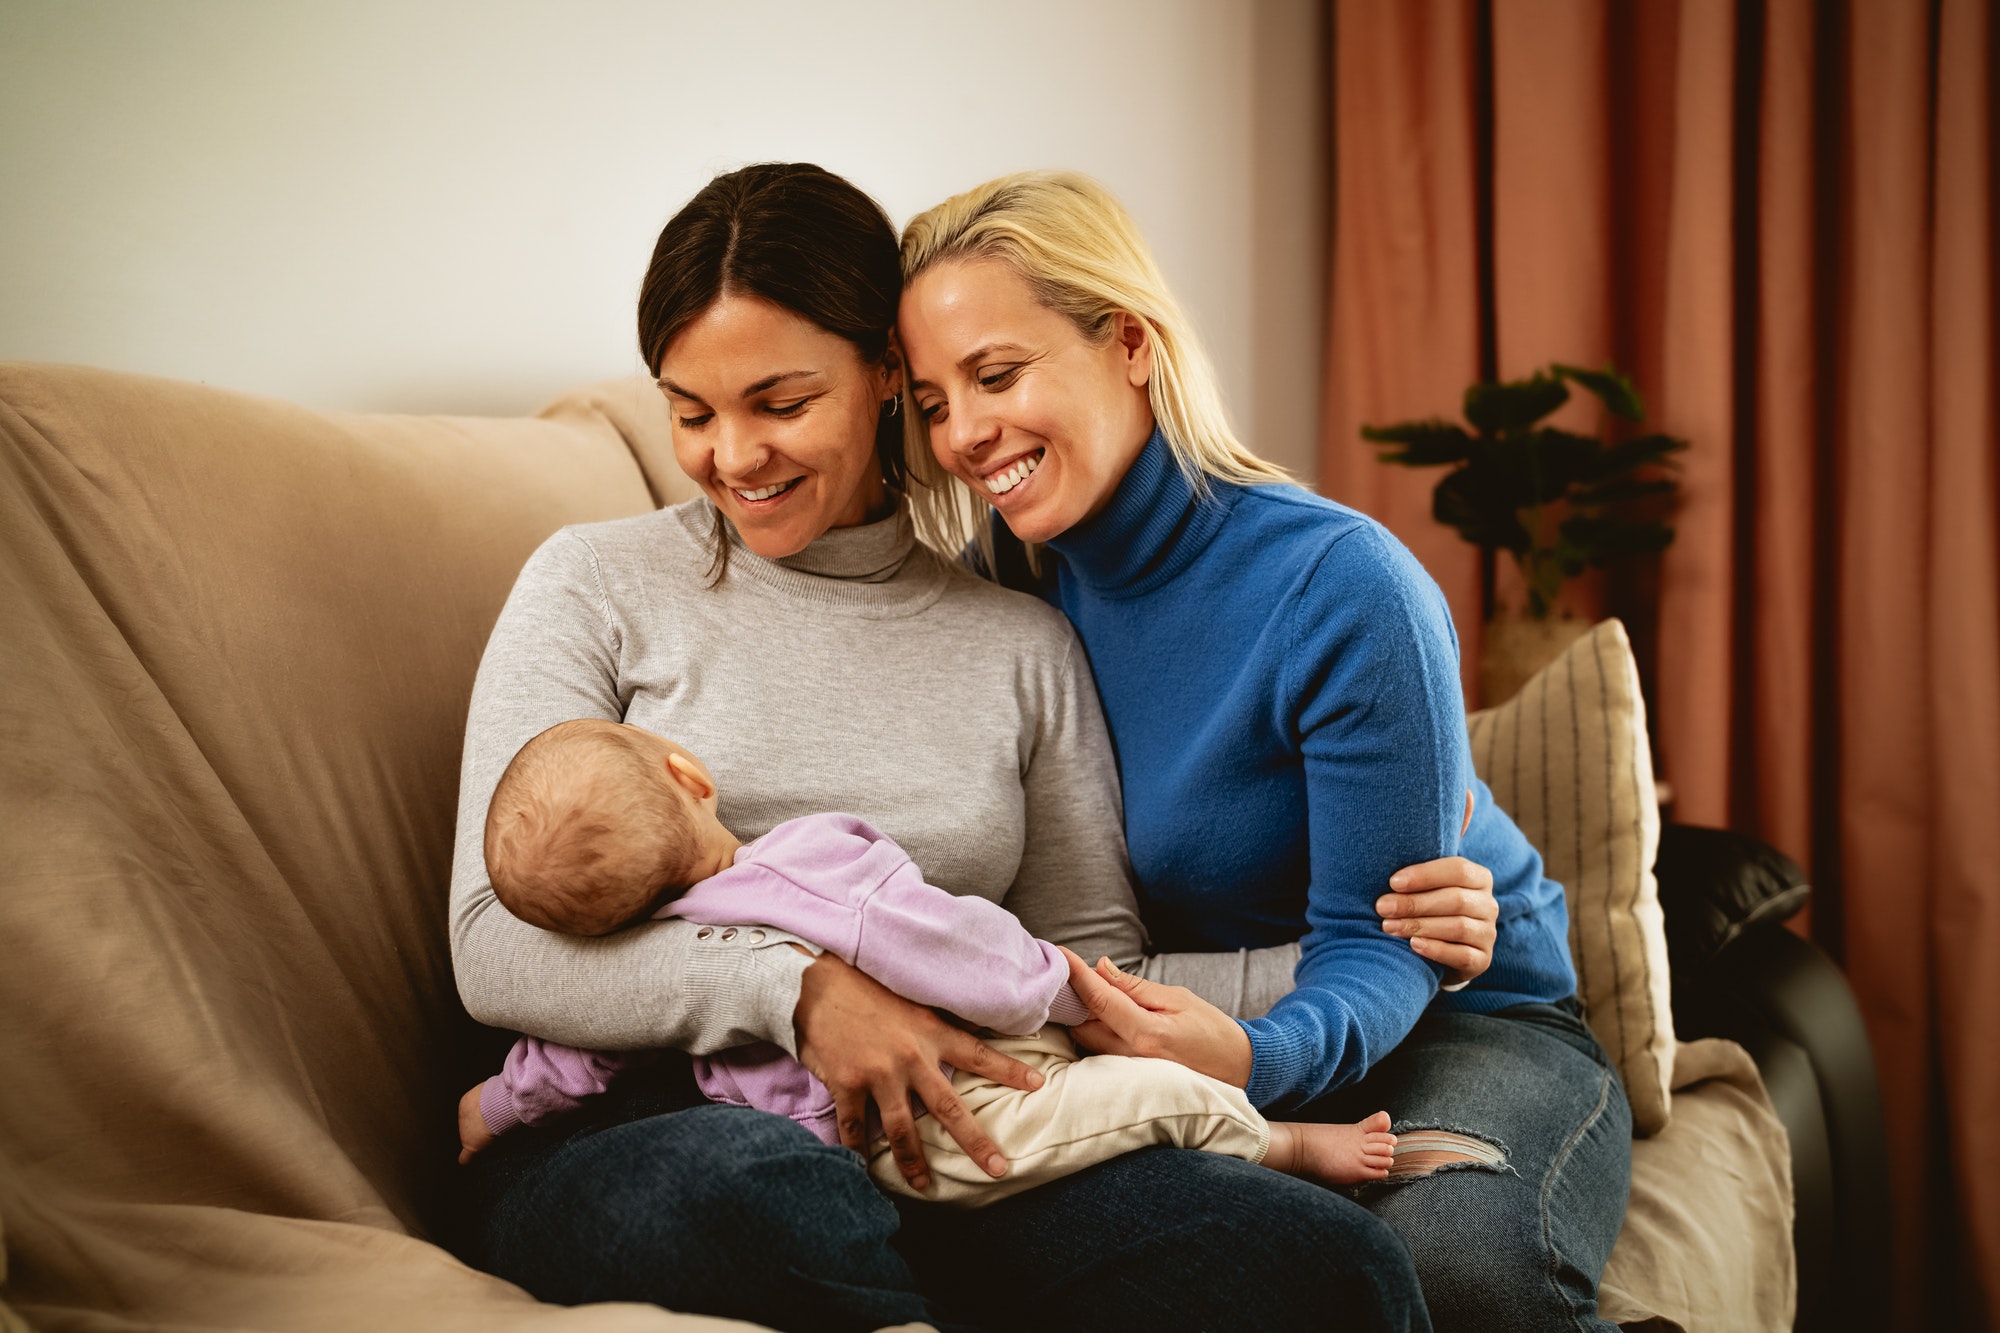 Happy lesbian couple taking care of her small baby at home - LGBT Family and maternity concept